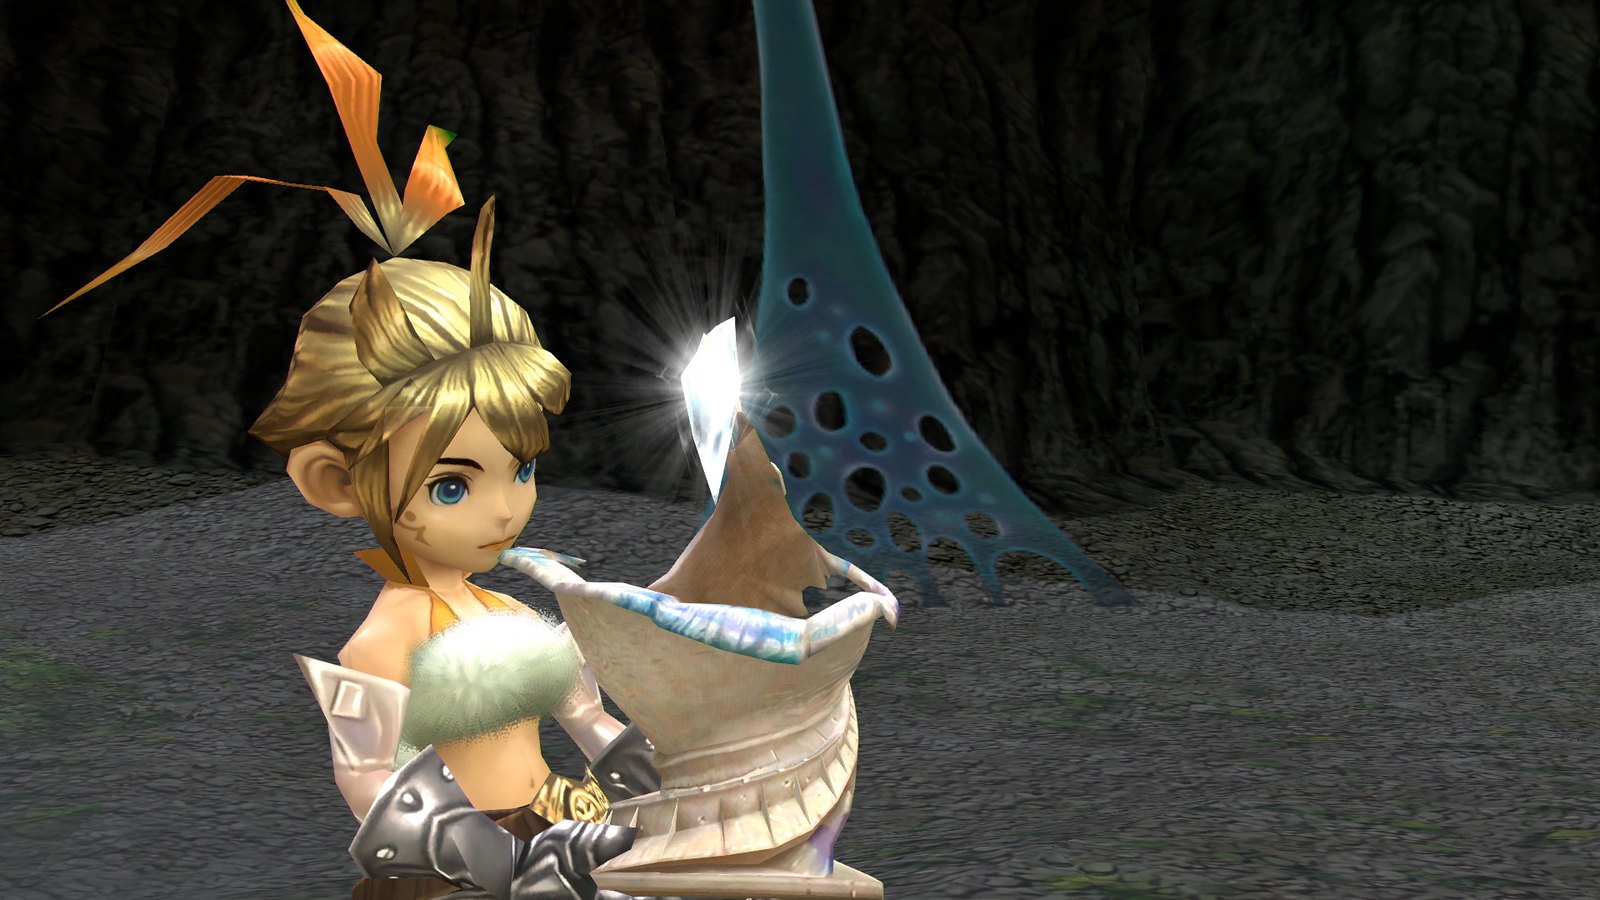 Final Fantasy Crystal Chronicles Remastered Edition on PS4